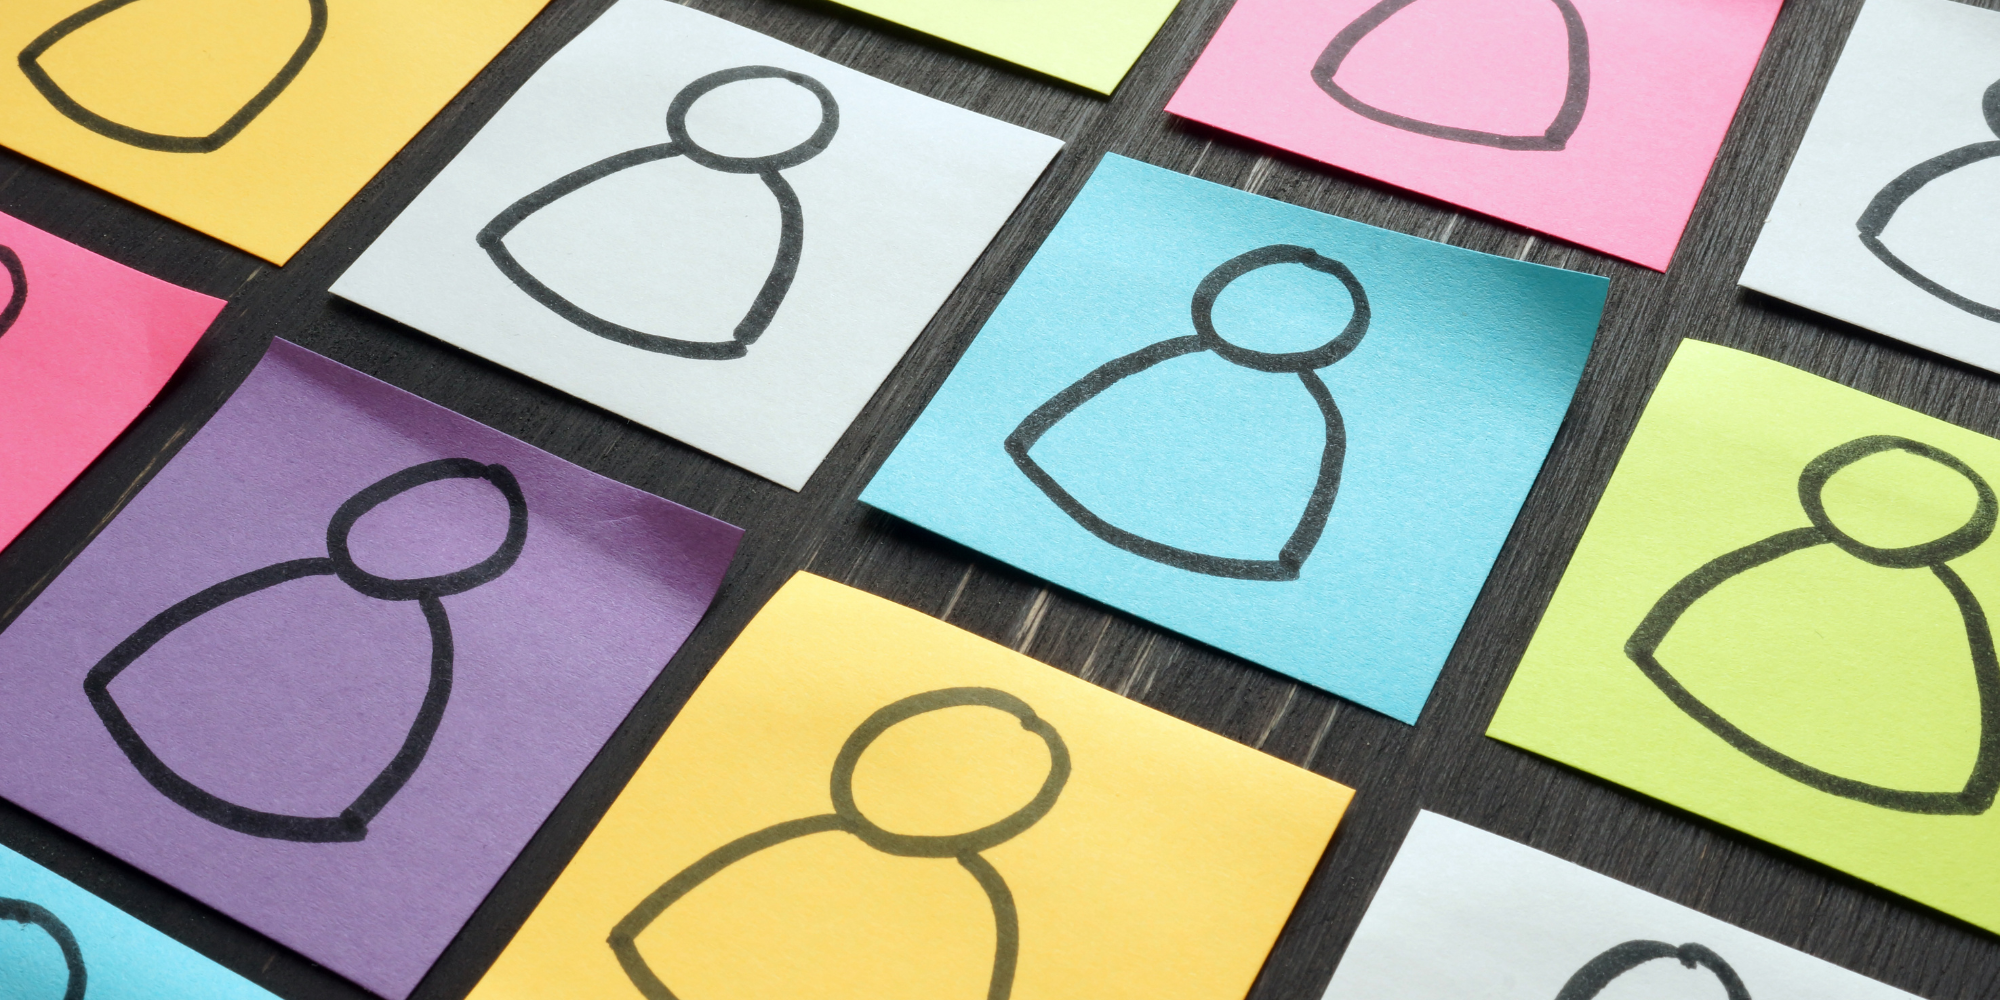 Different colored sticky notes with stick figures